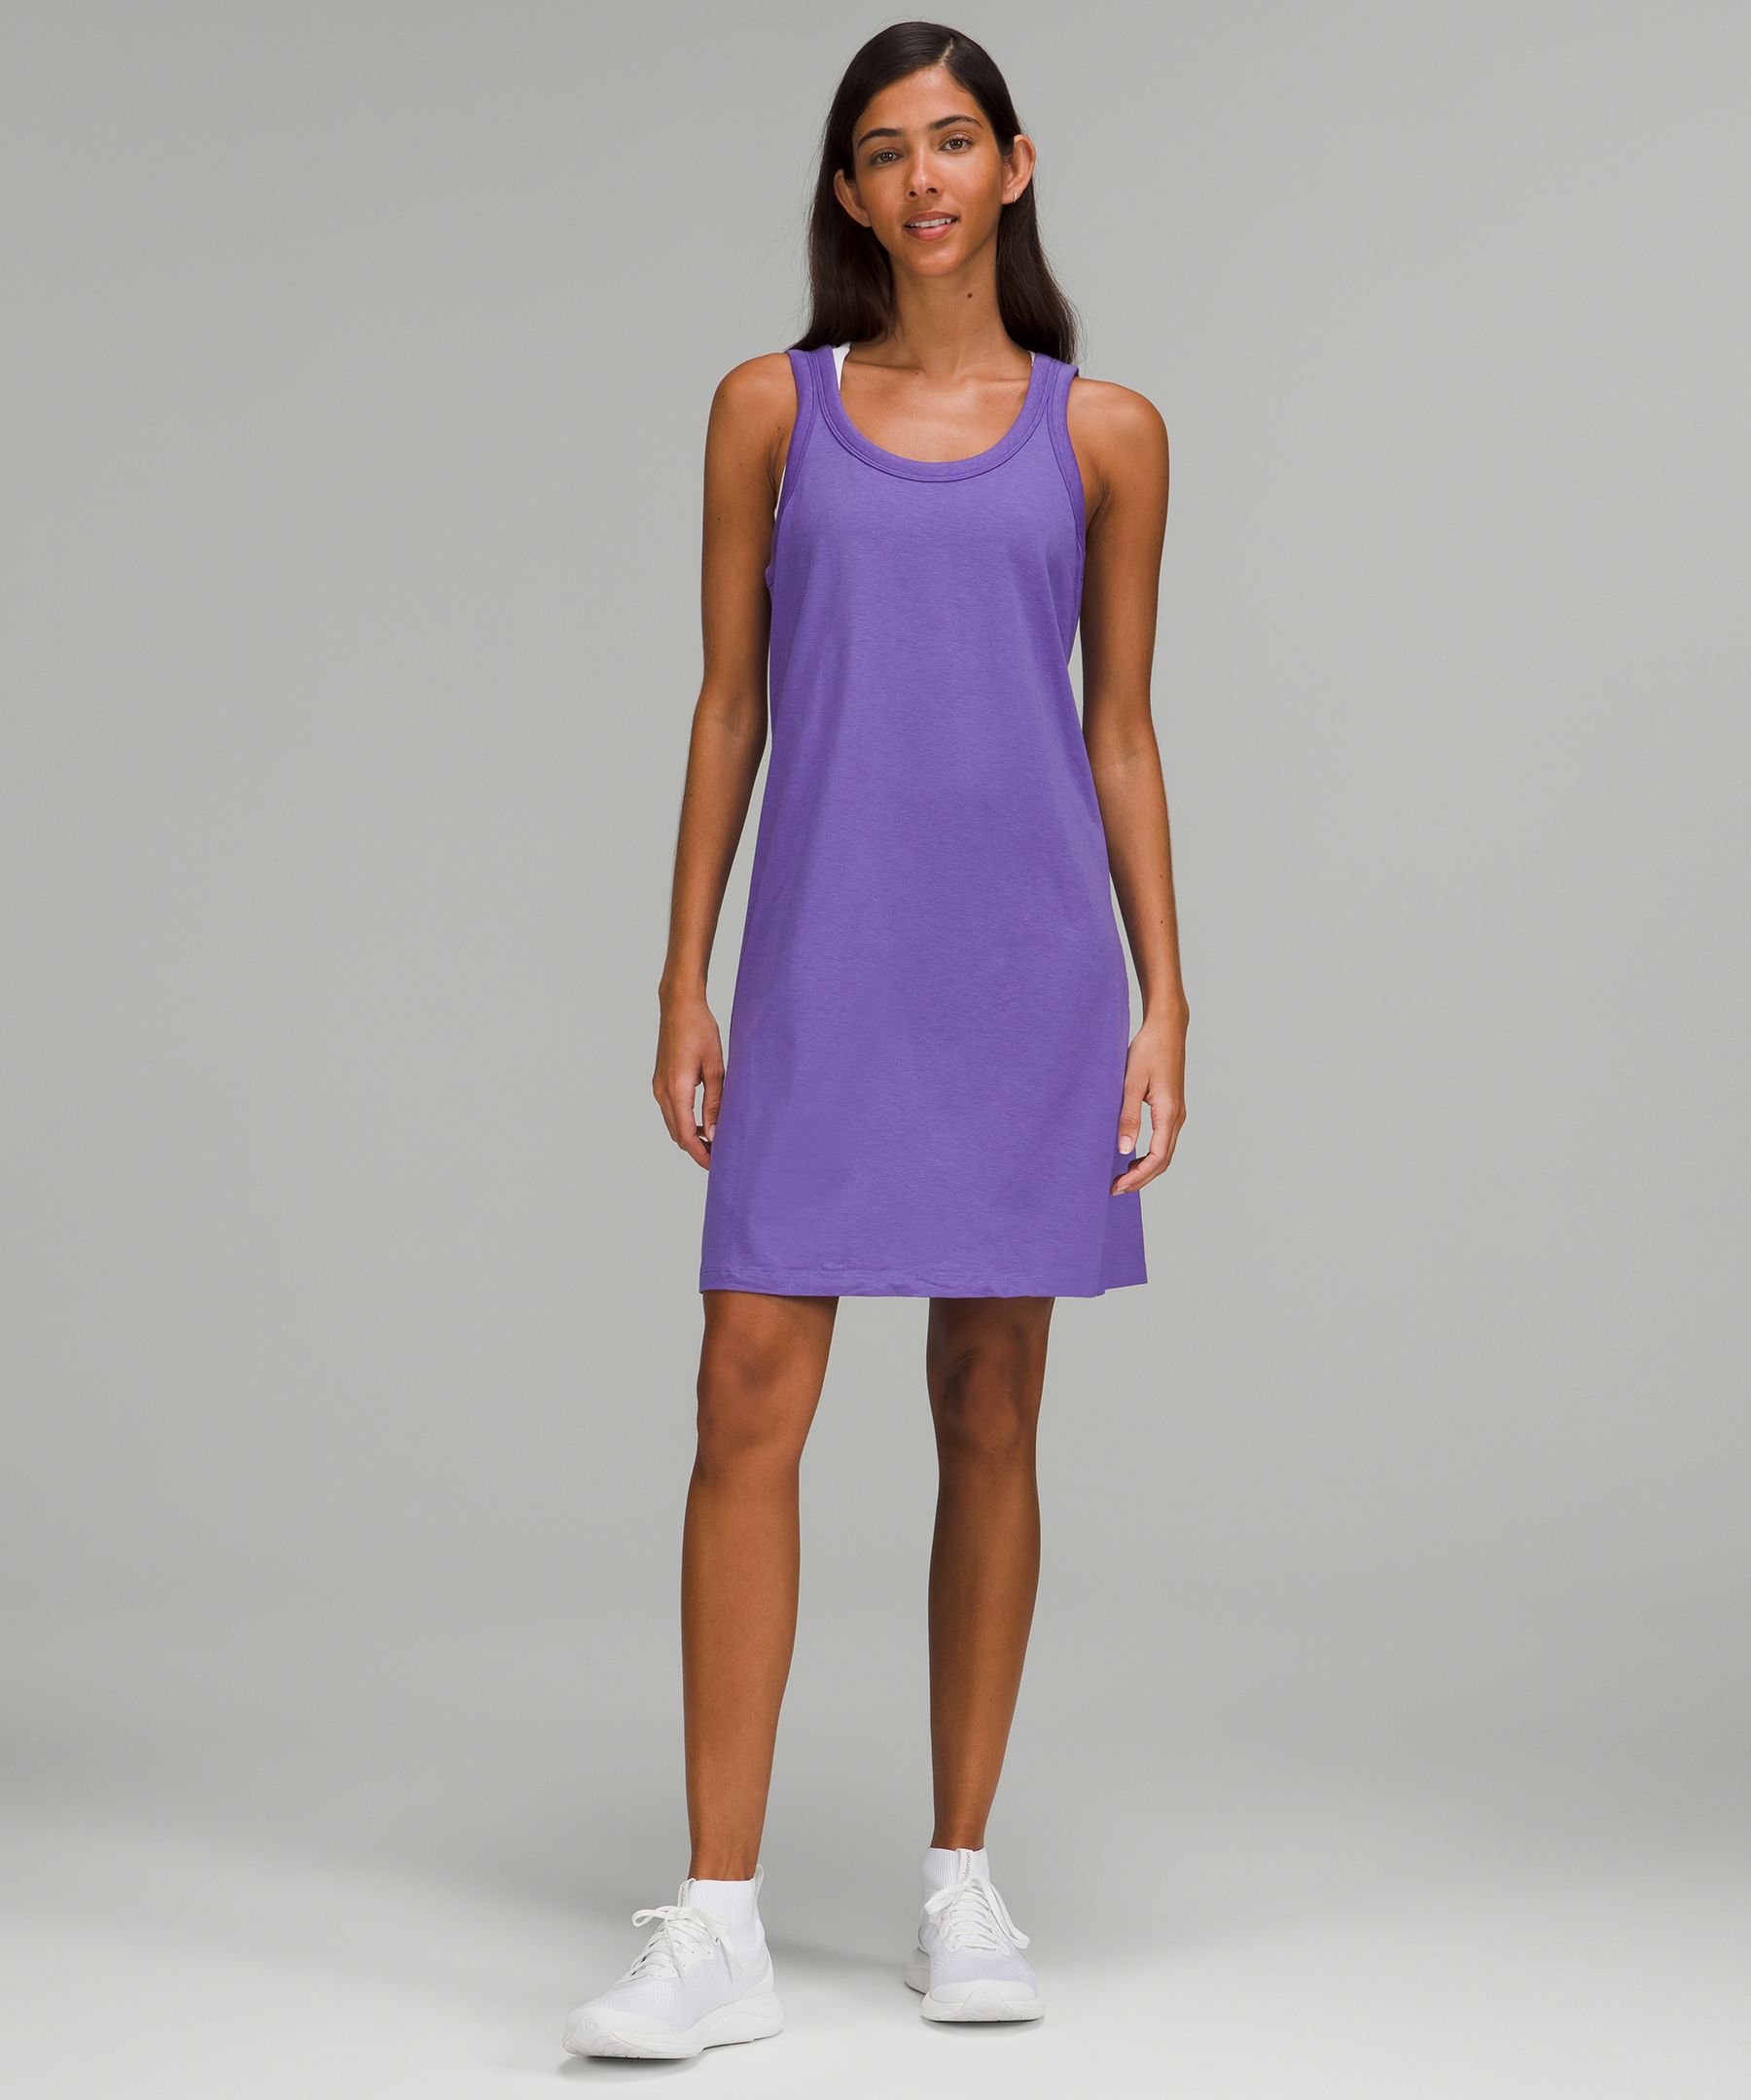 Lululemon Classic-fit Cotton-blend Scoop Dress In Charged Indigo